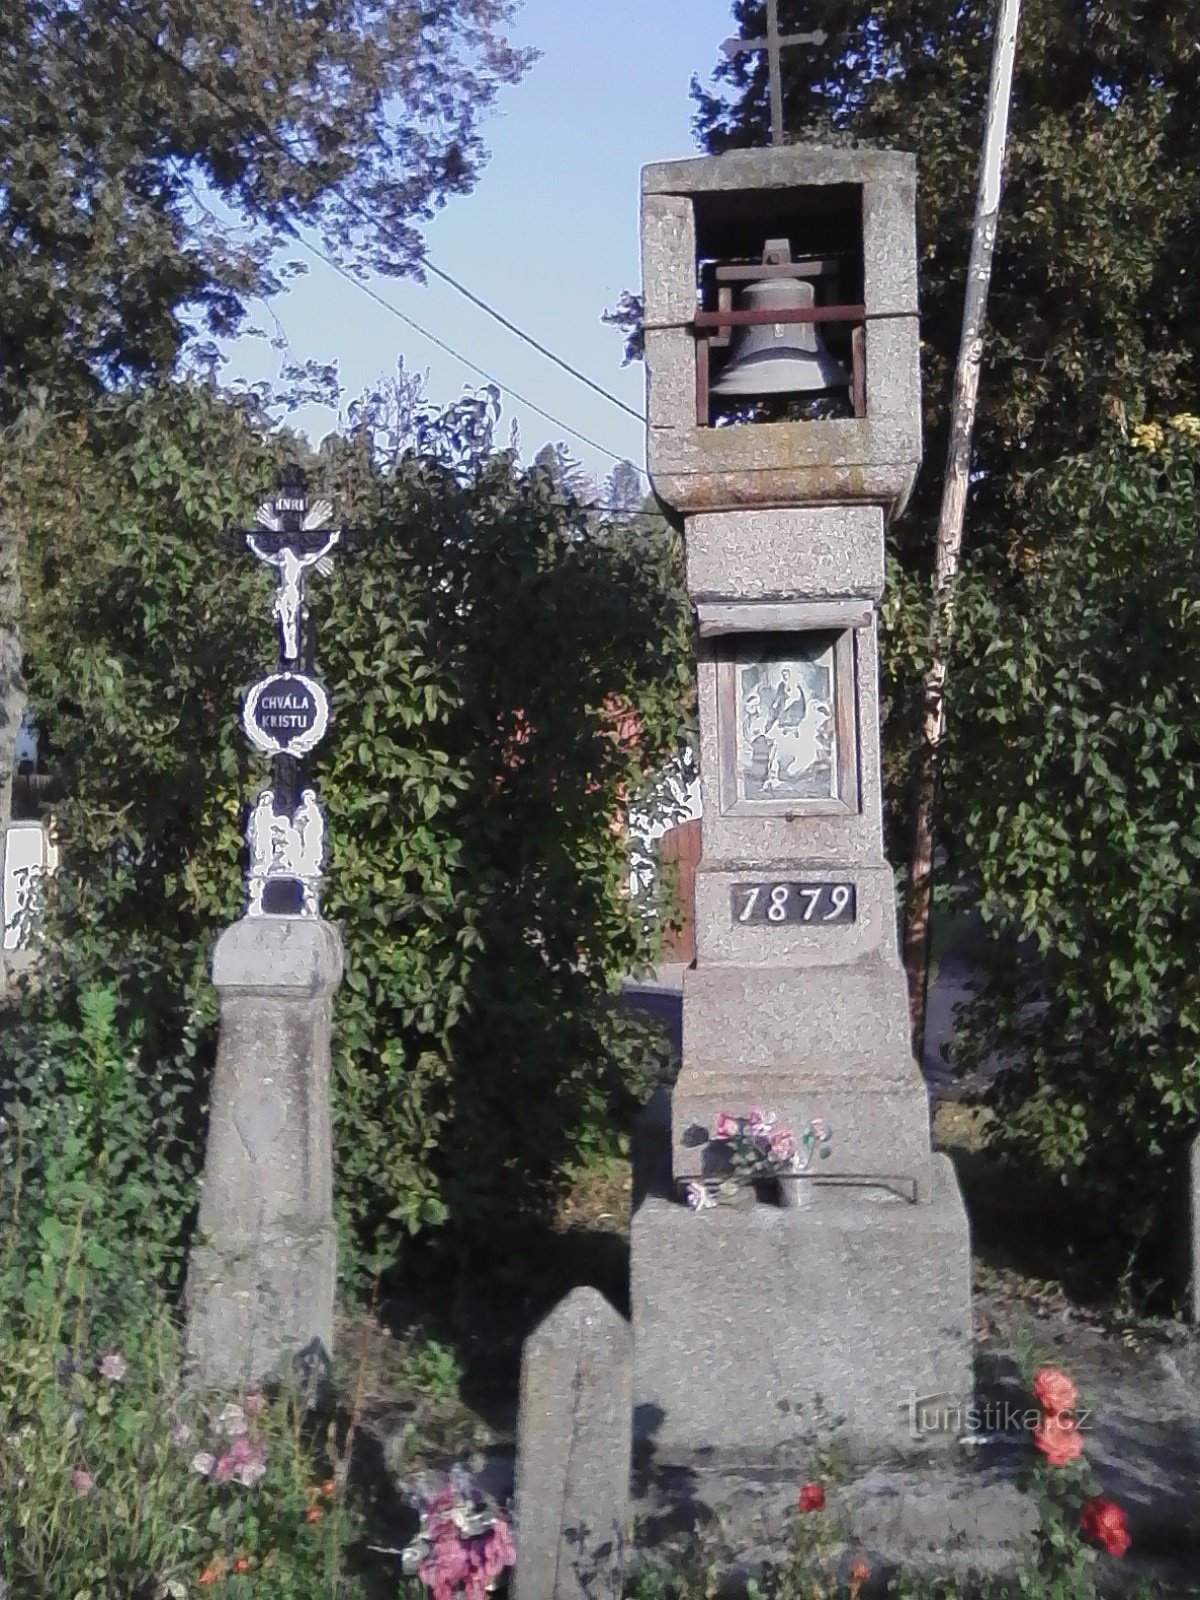 2. Stone carved belfry with a cross from 1879 in Vilasová Lhota